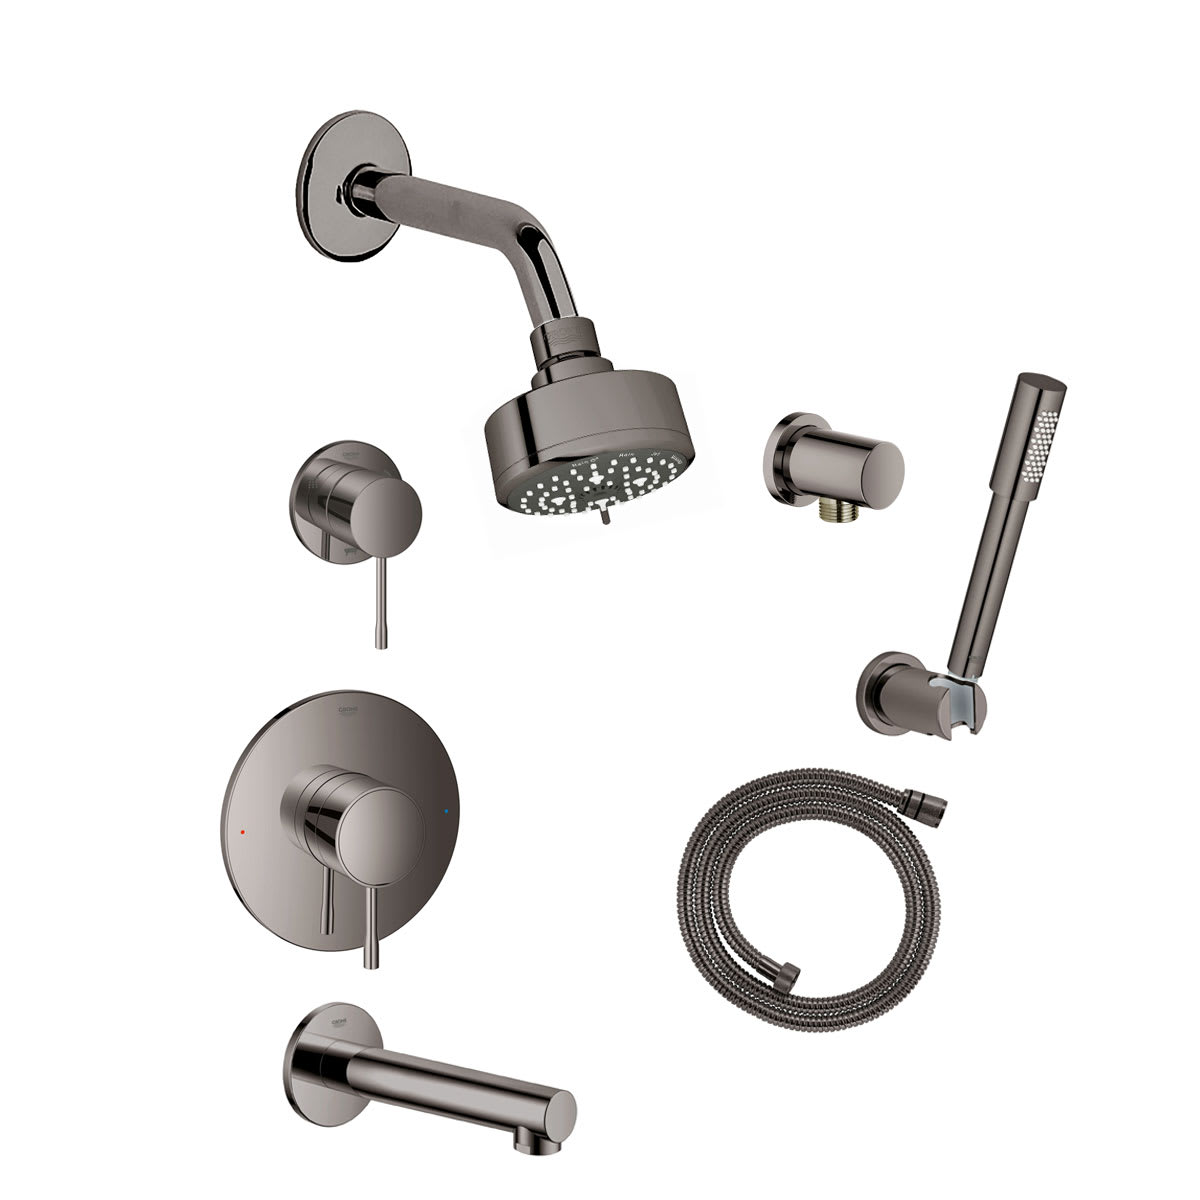 Aan Elektropositief prototype Grohe GSS-Essence-PB-5-A00 Hard Graphite Essence Pressure Balanced Shower  System with Shower Head, Hand Shower, Shower Arm, and Hose - Valves  Included - FaucetDirect.com